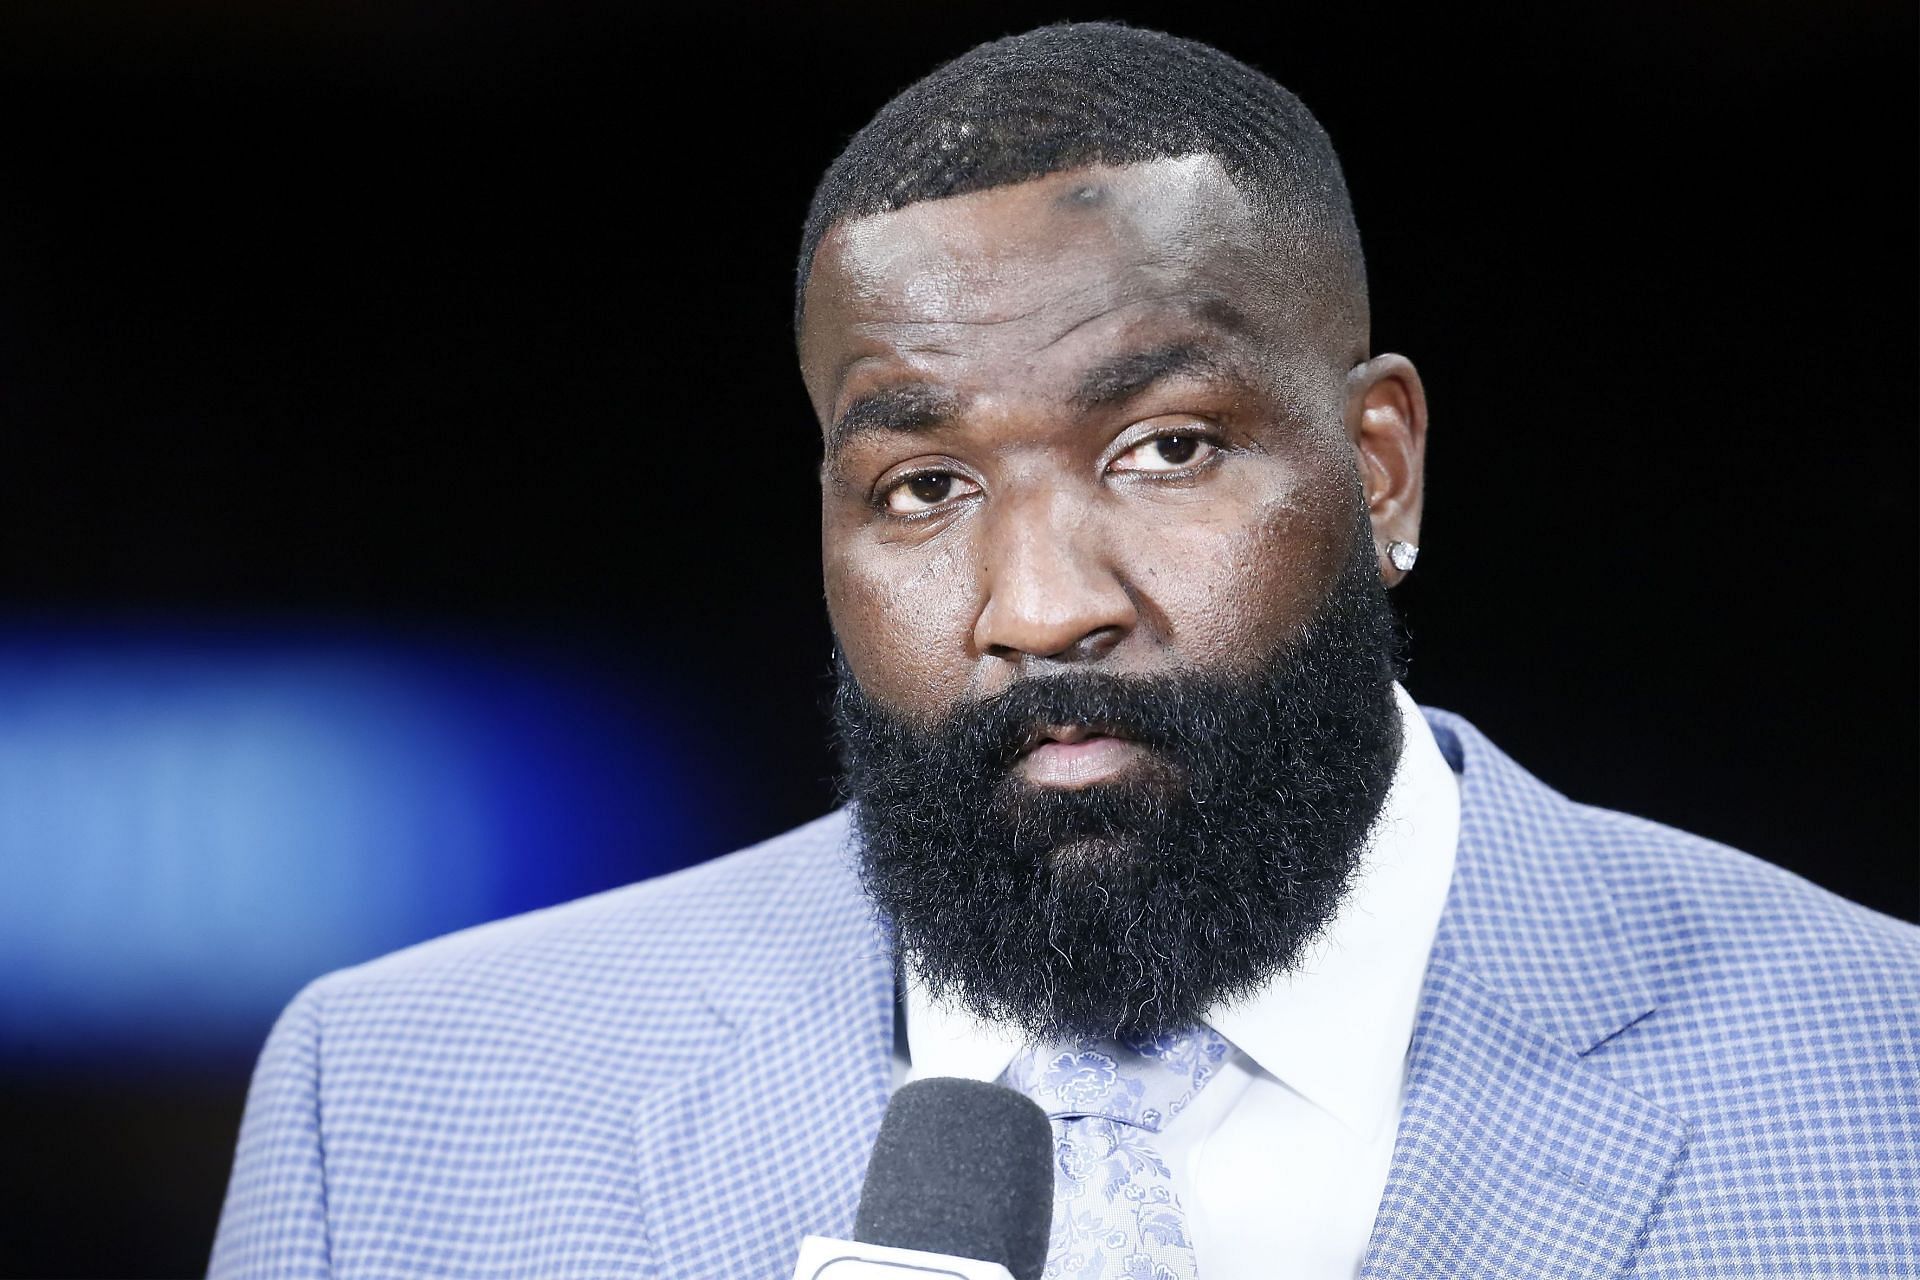 Kendrick Perkins has been part of ESPN for several years.